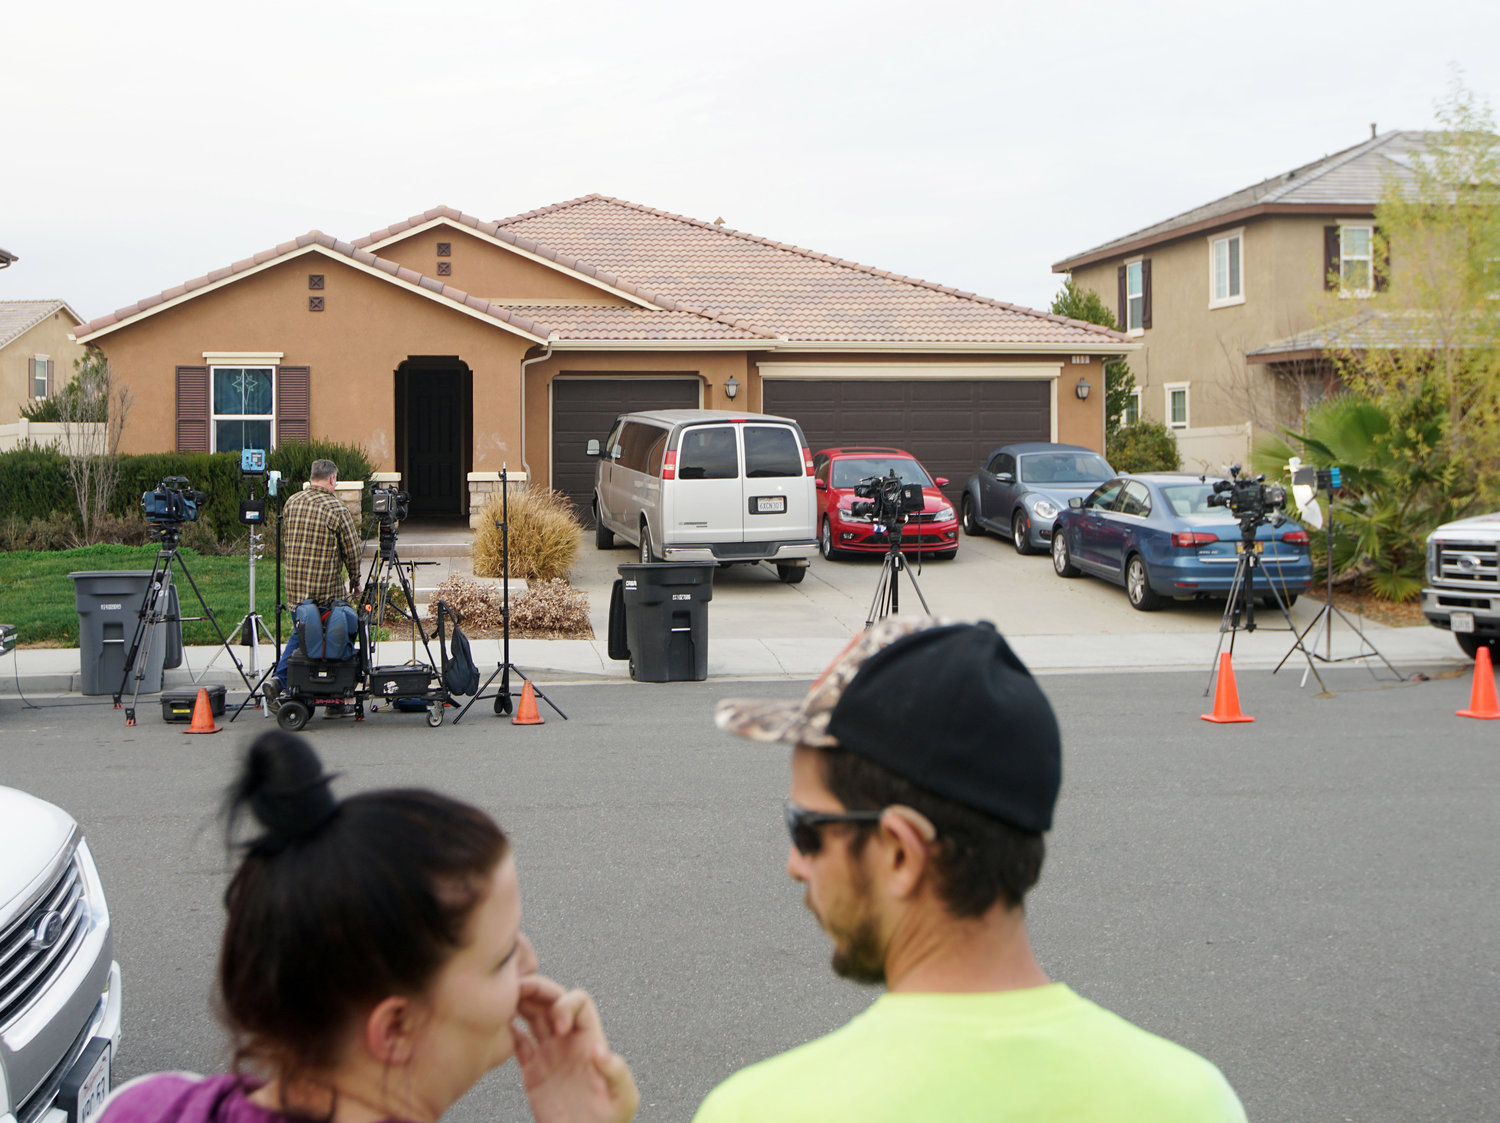 The home in Perris, Calif., where authorities discovered siblings restrained and living in 